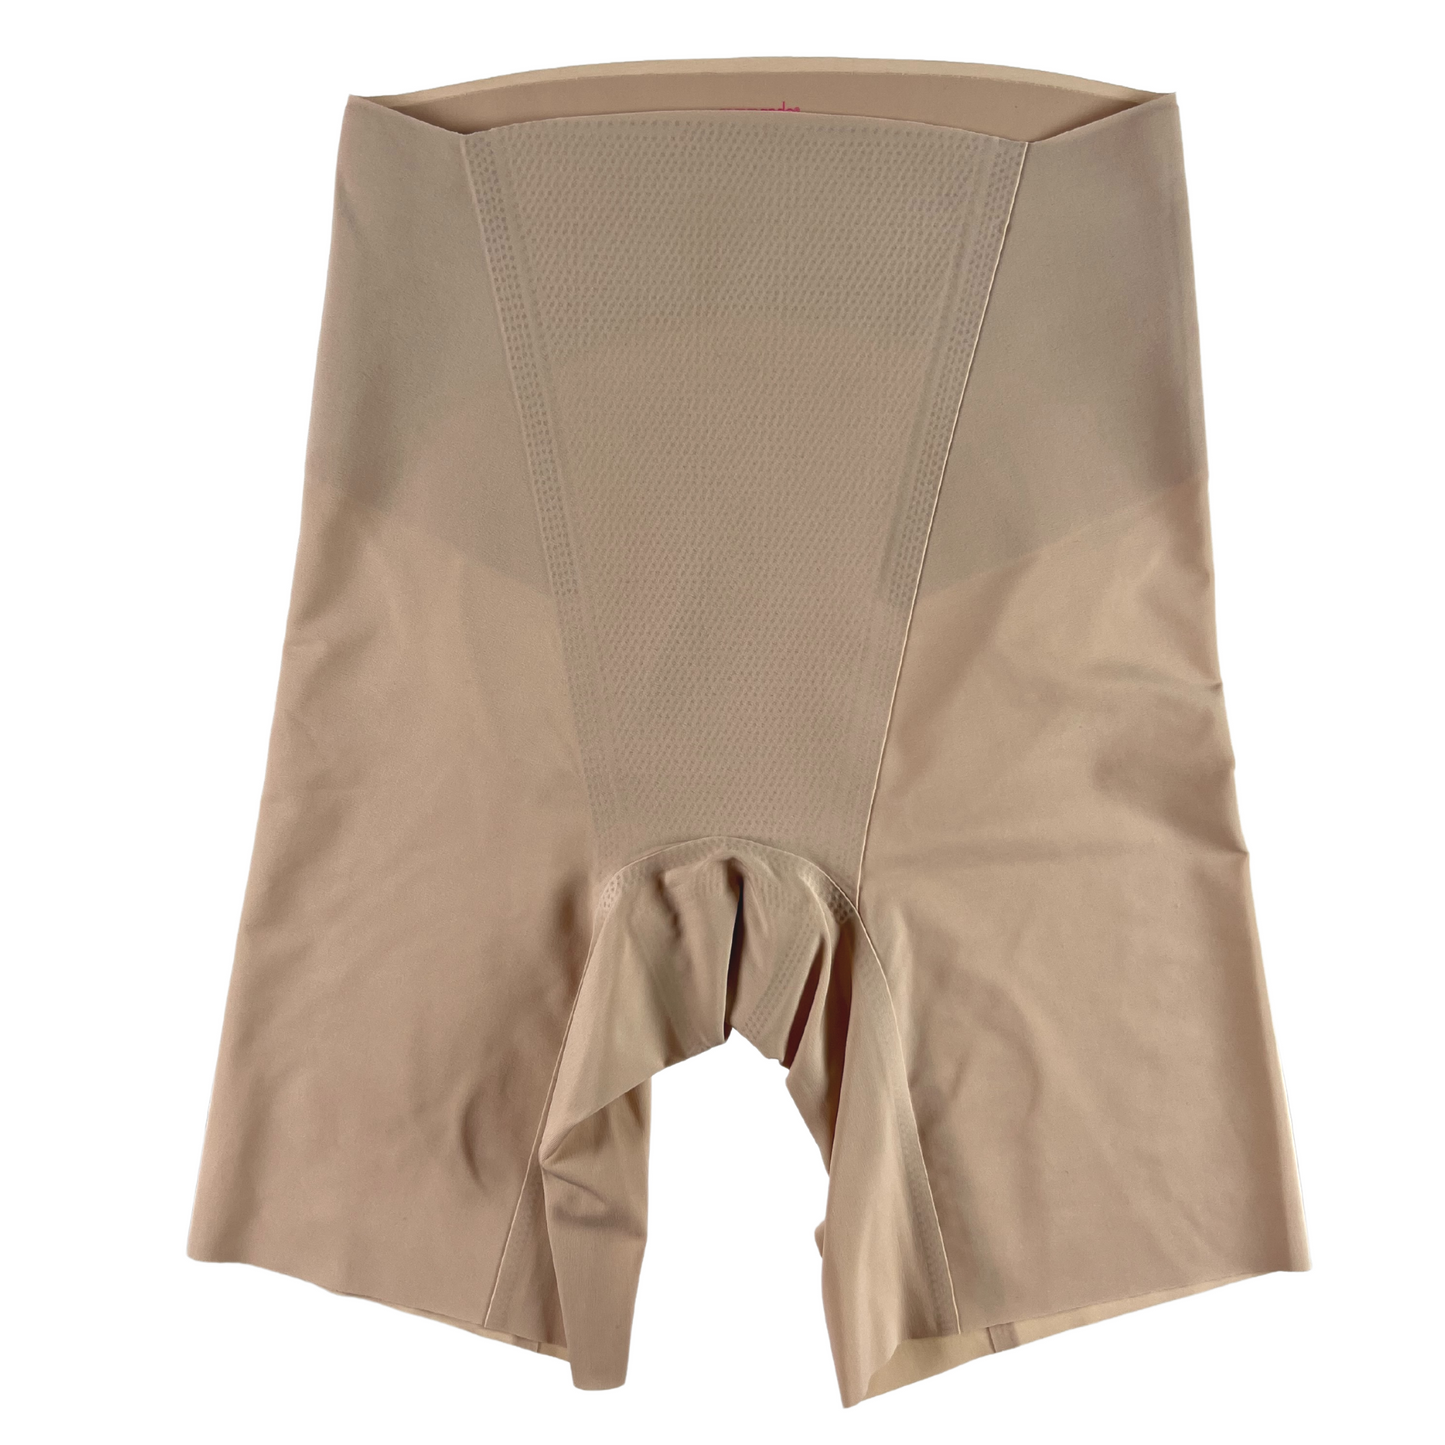 Commando Classic Control Smoothing High-Waisted Short, Beige